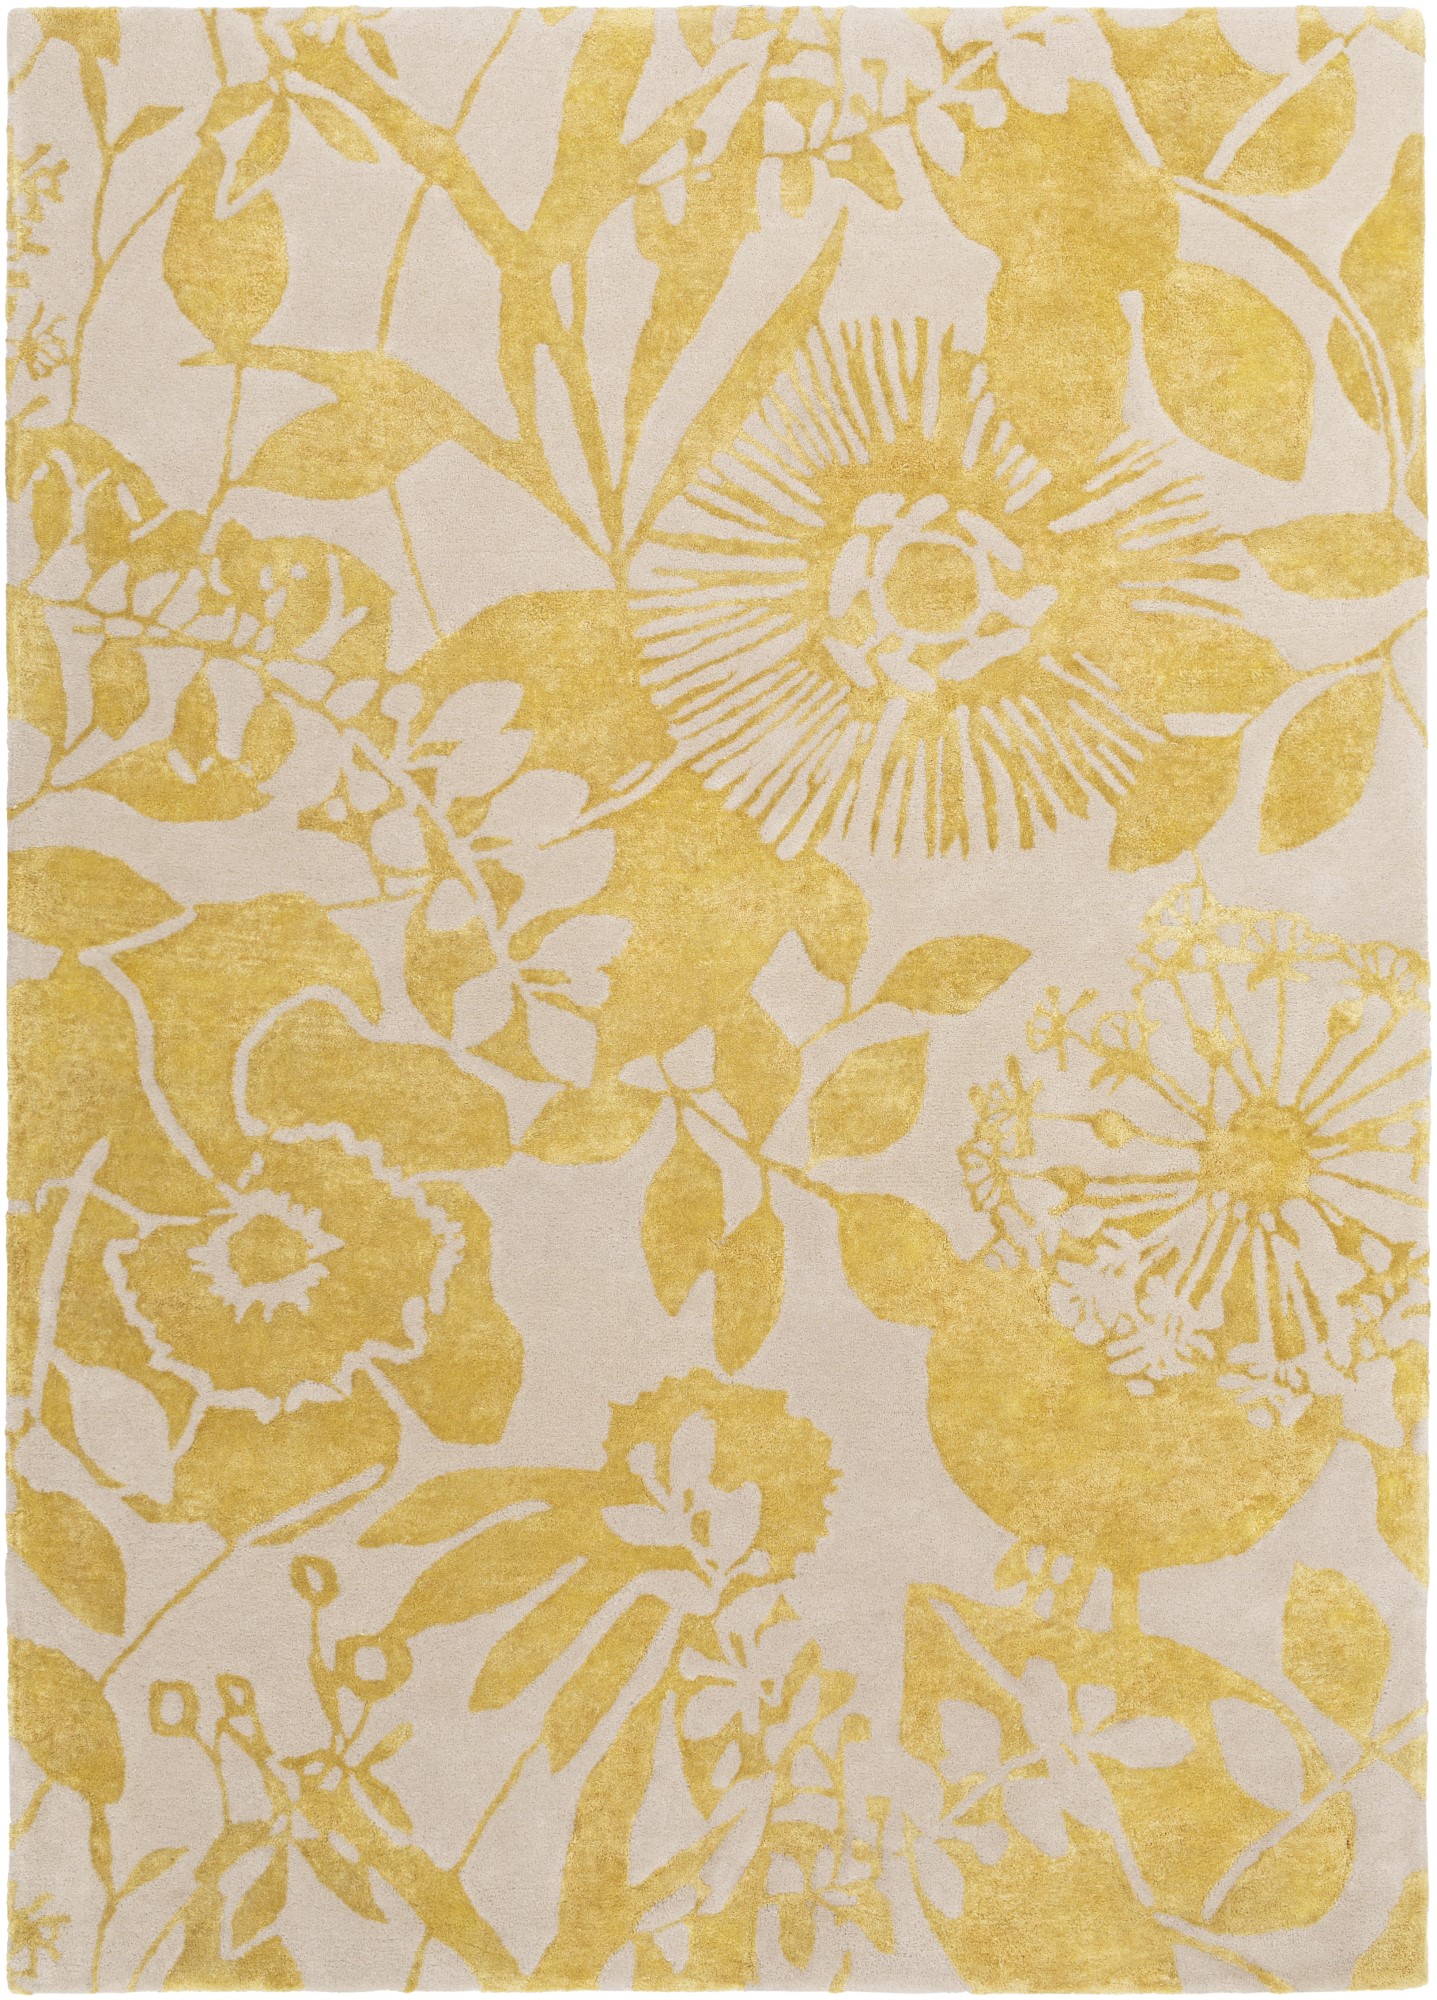 The Best Yellow Gold Area Rugs, Yellow Patterned Rug